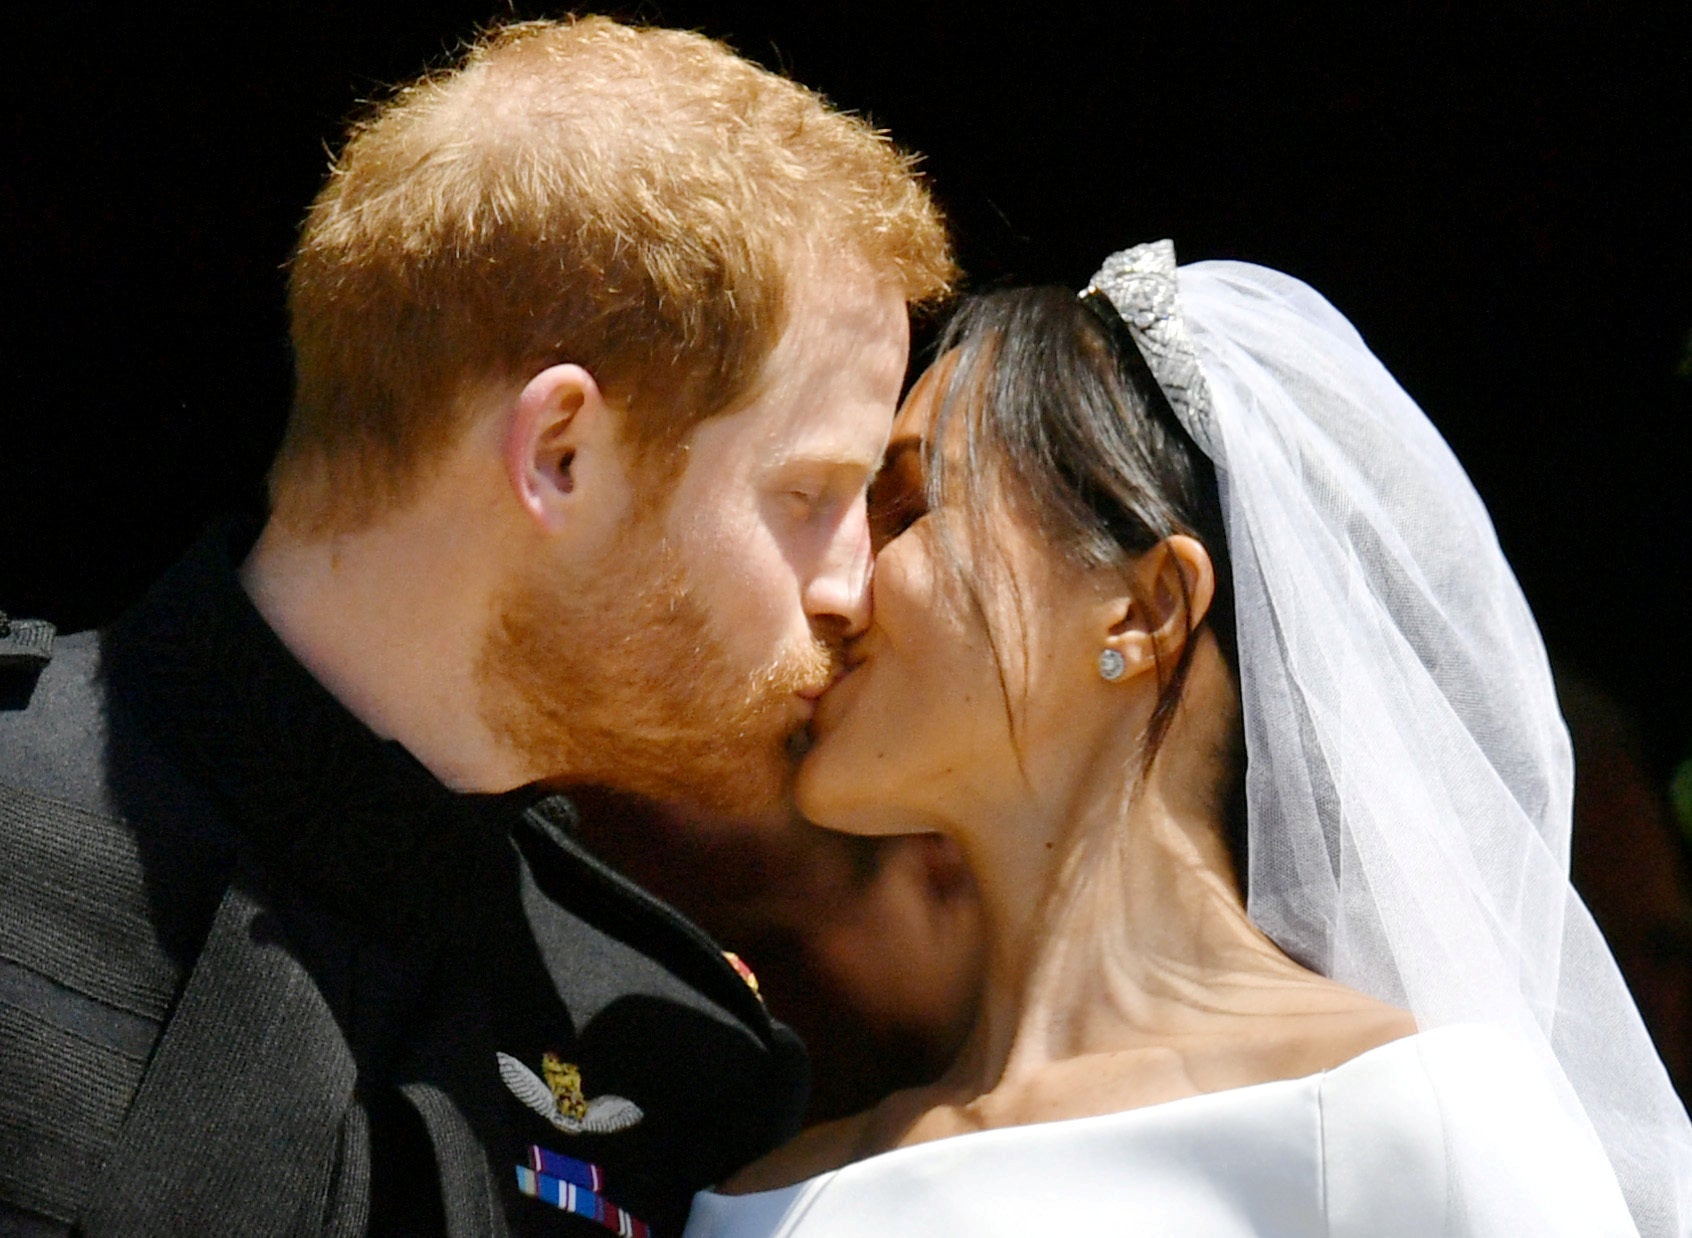 Royal wedding success for news publishers with huge Sunday newspaper sales uplift